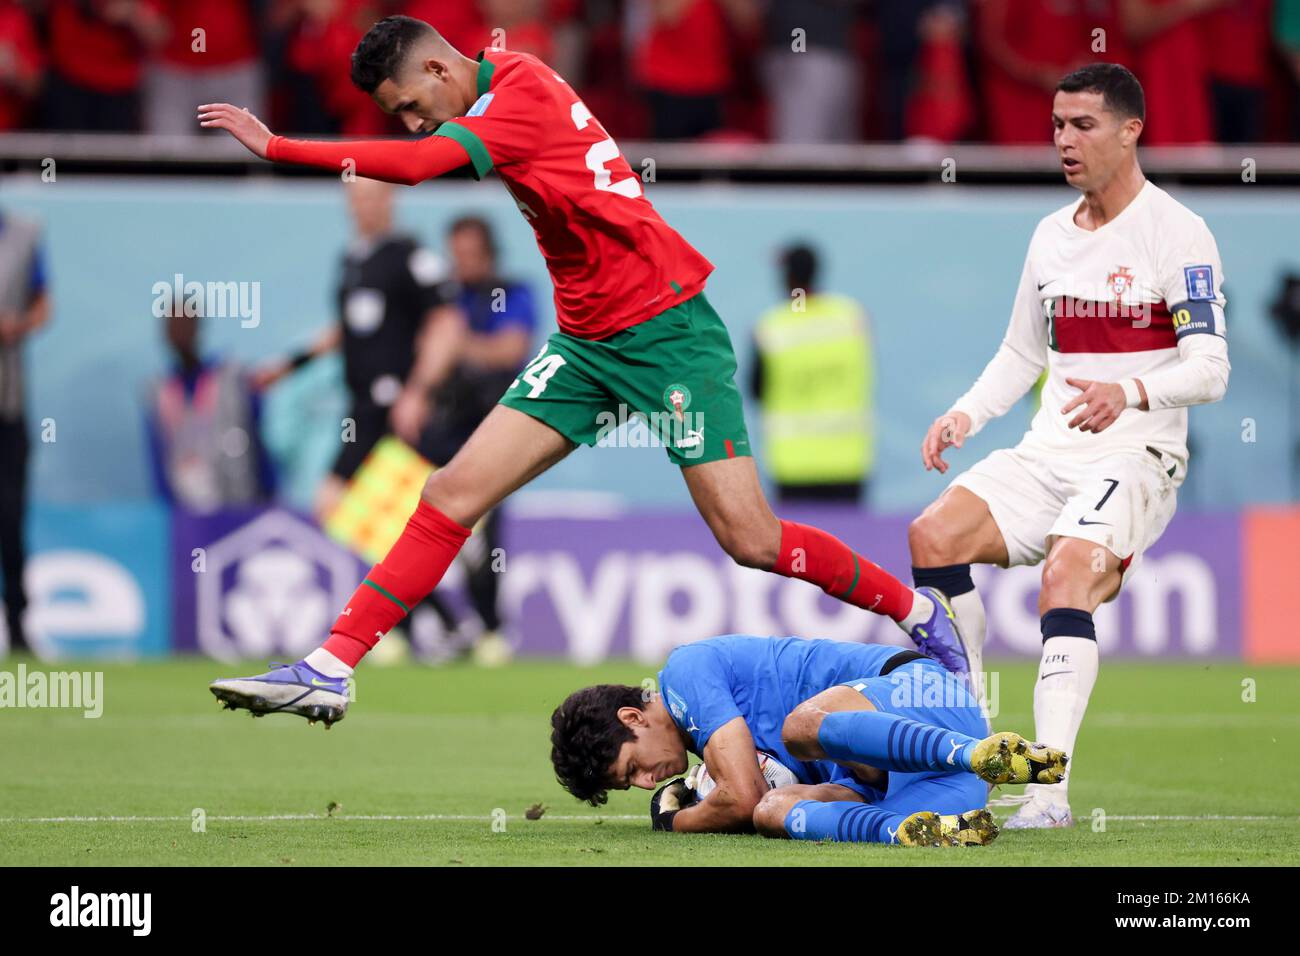 Doha, Qatar. 10th Dec, 2022. Yassine Bounou, goalkeeper of Morocco, makes a save during the Quarterfinal between Morocco and Portugal of the 2022 FIFA World Cup at Al Thumama Stadium in Doha, Qatar, Dec. 10, 2022. Credit: Li Gang/Xinhua/Alamy Live News Stock Photo